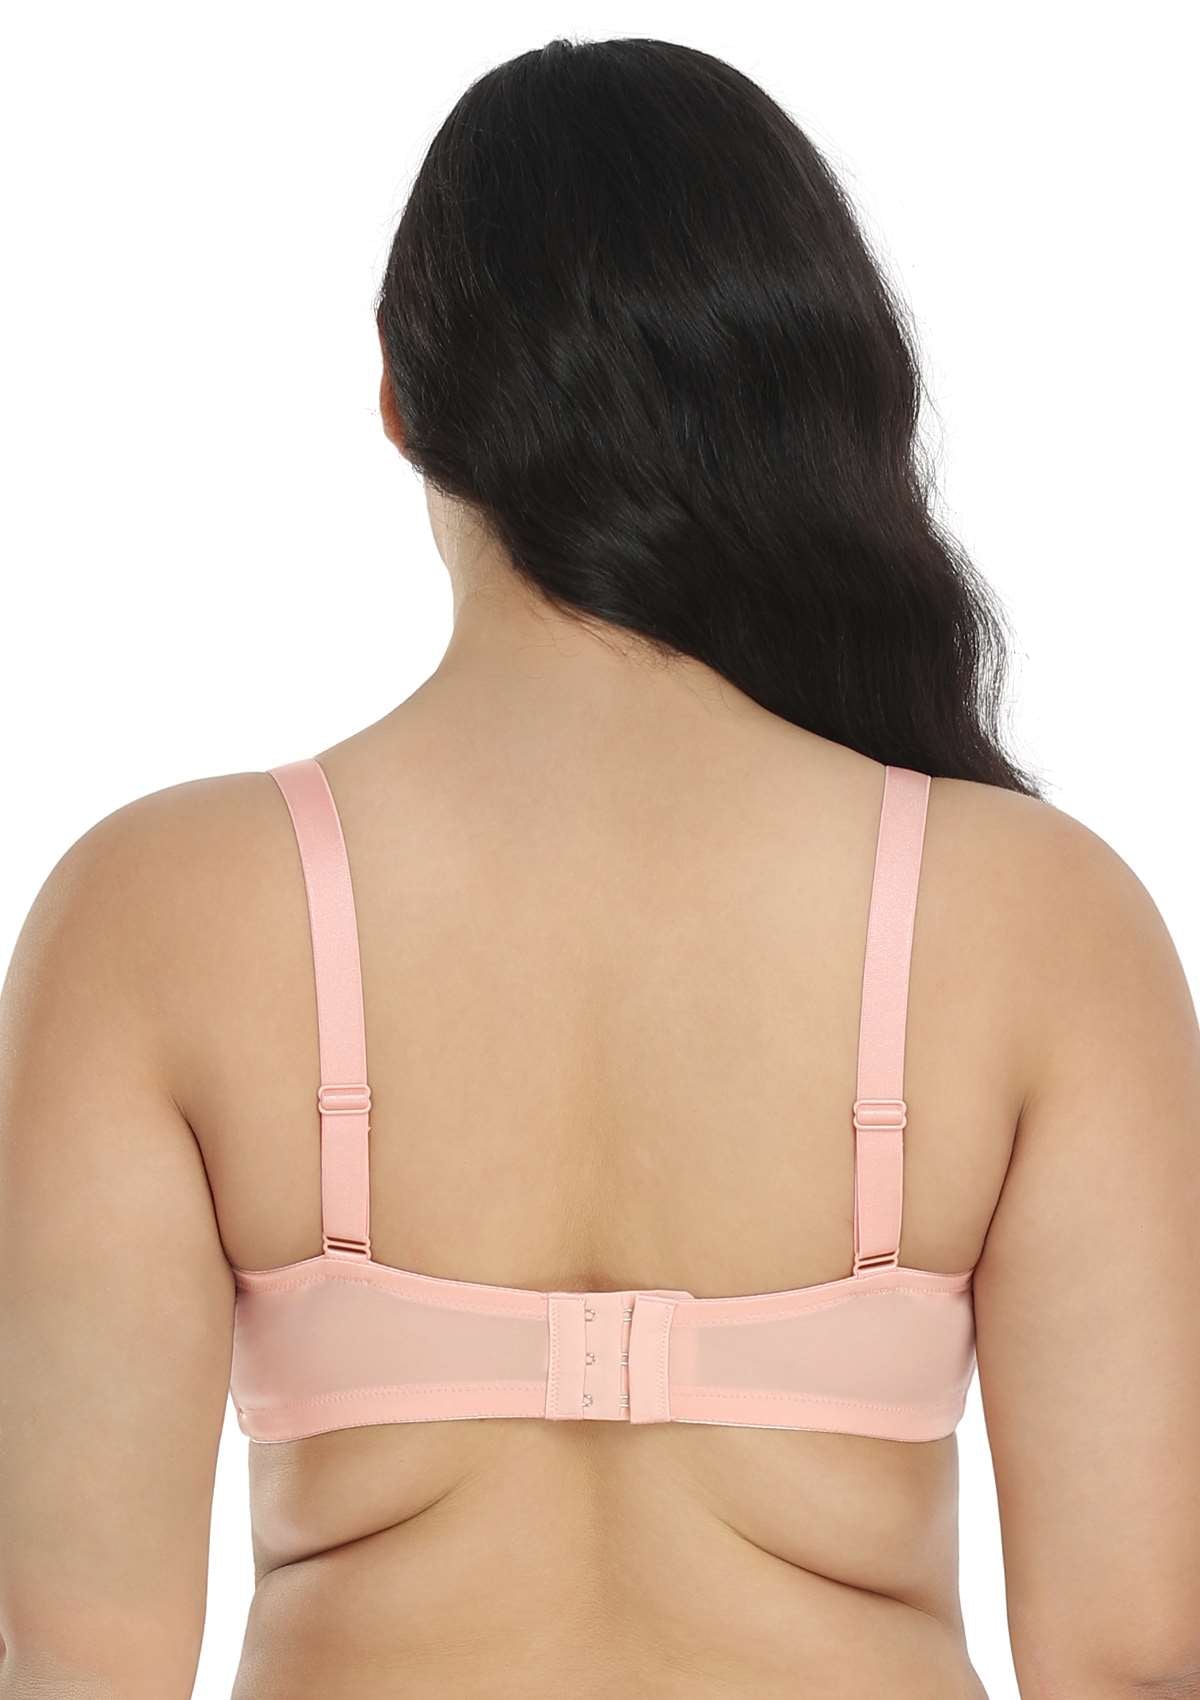 HSIA Rosa Bonica Sheer Lace Mesh Unlined Thin Comfy Woman Bra - Pink / 40 / D